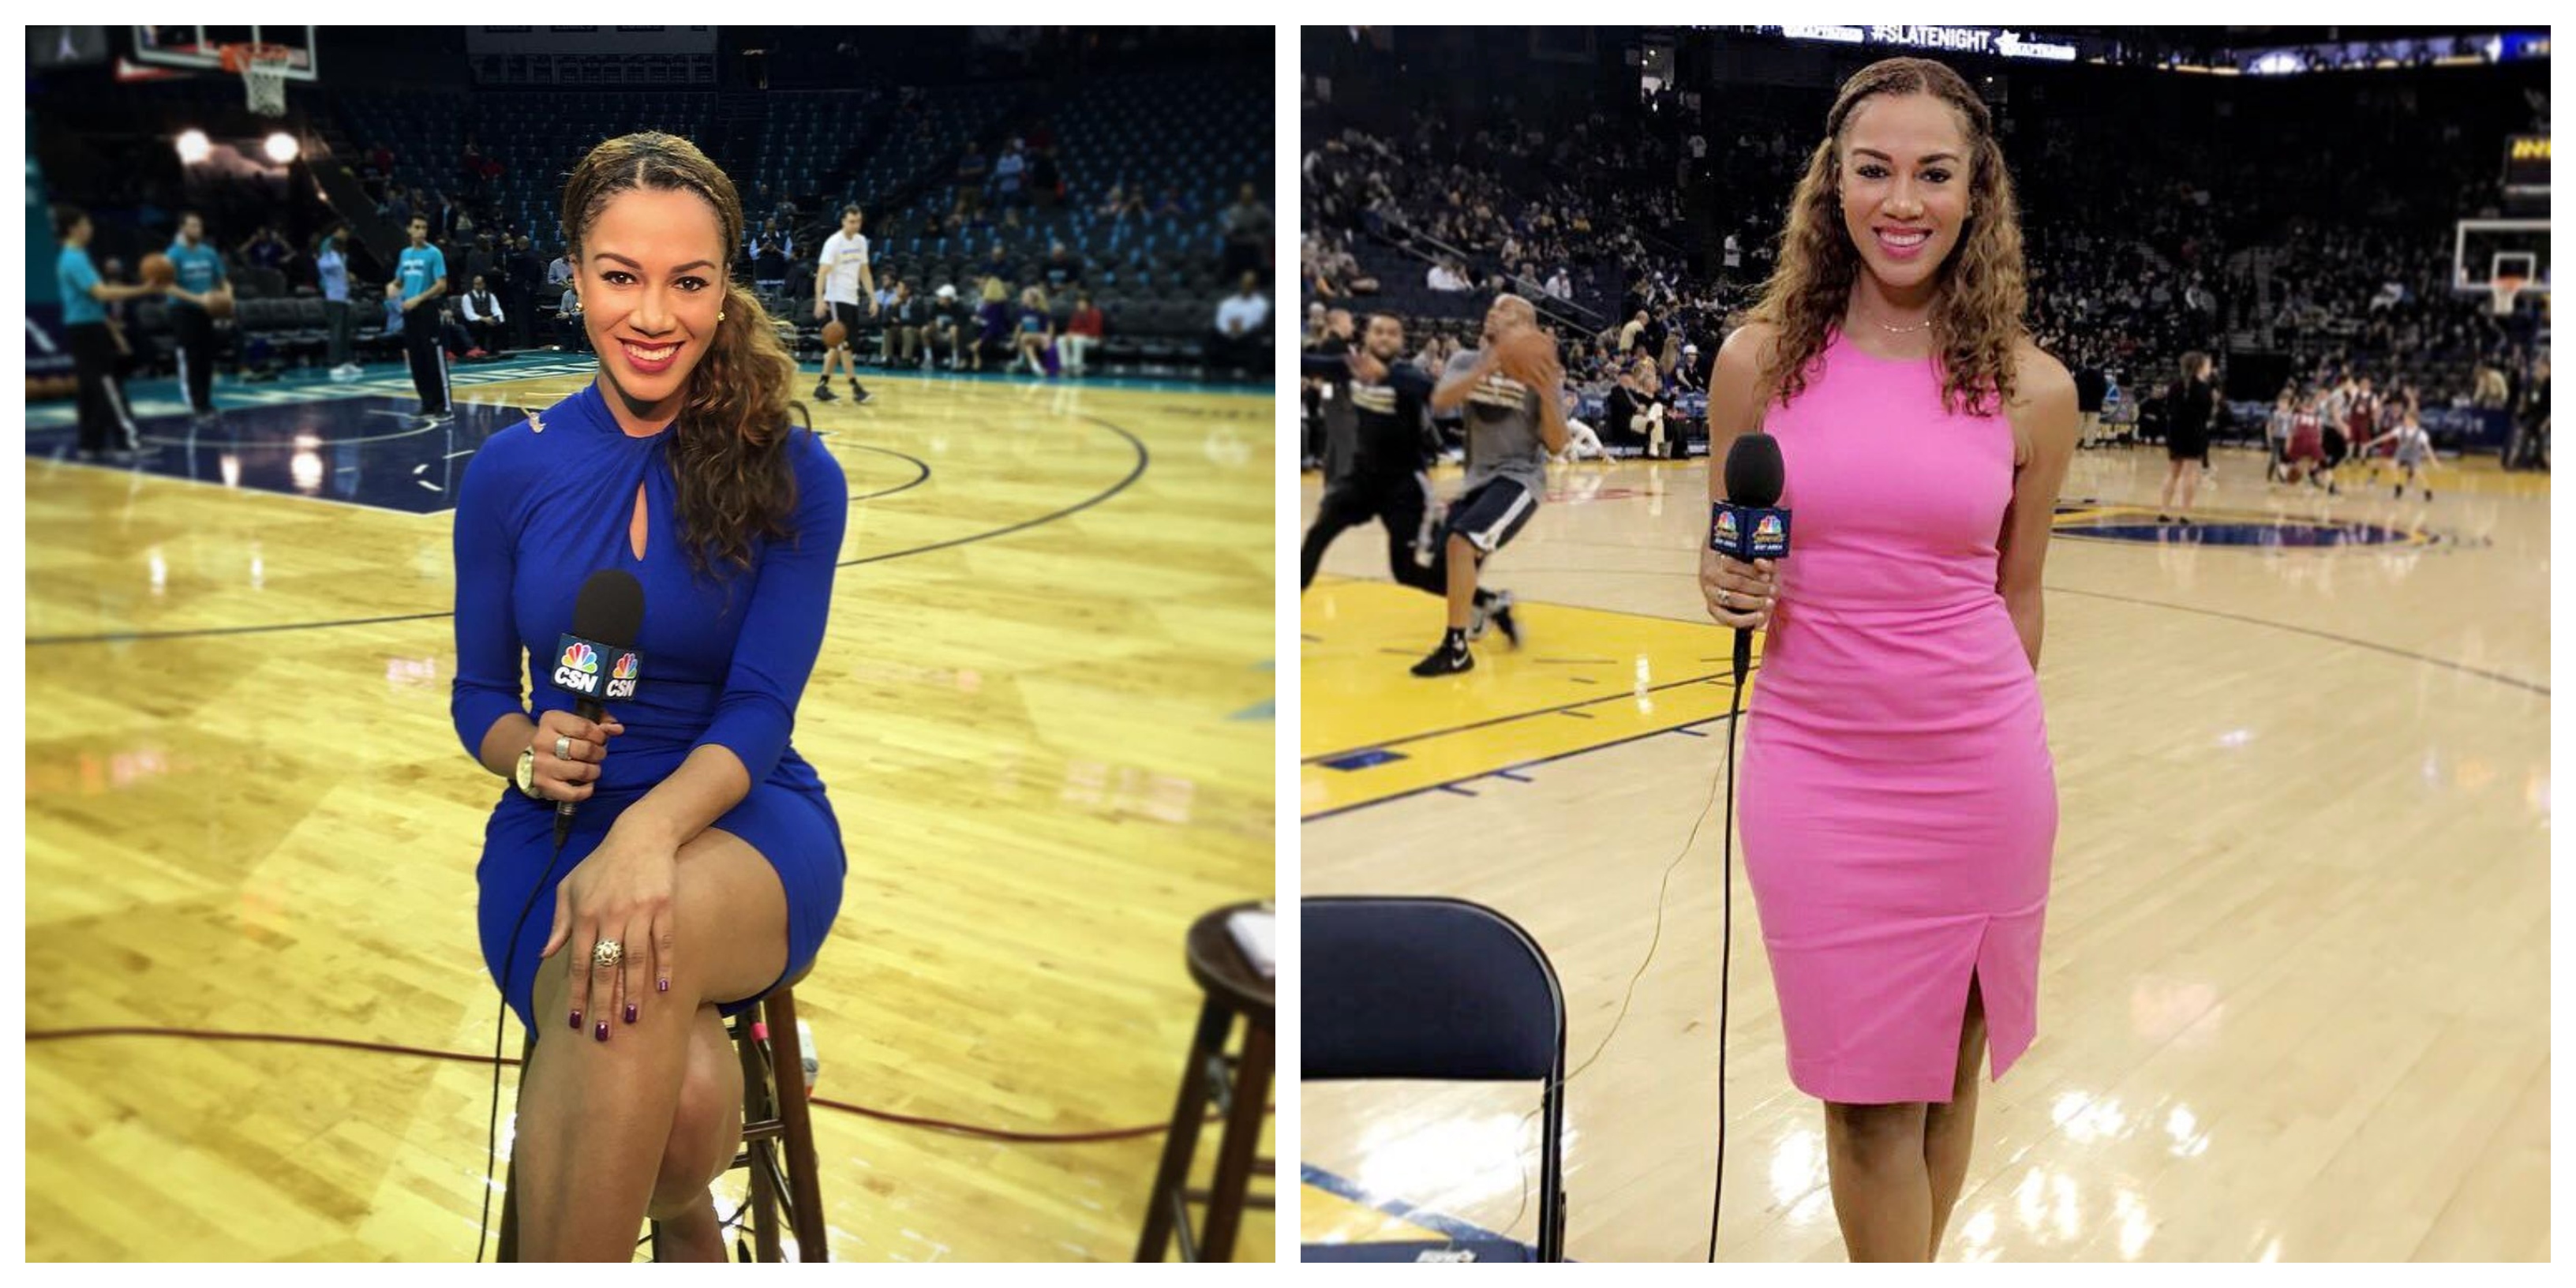 Read â€œBREAKING: Ros Gold-Onwude Says Sheâ€™ll Be Filling In For Molly Qerim O...